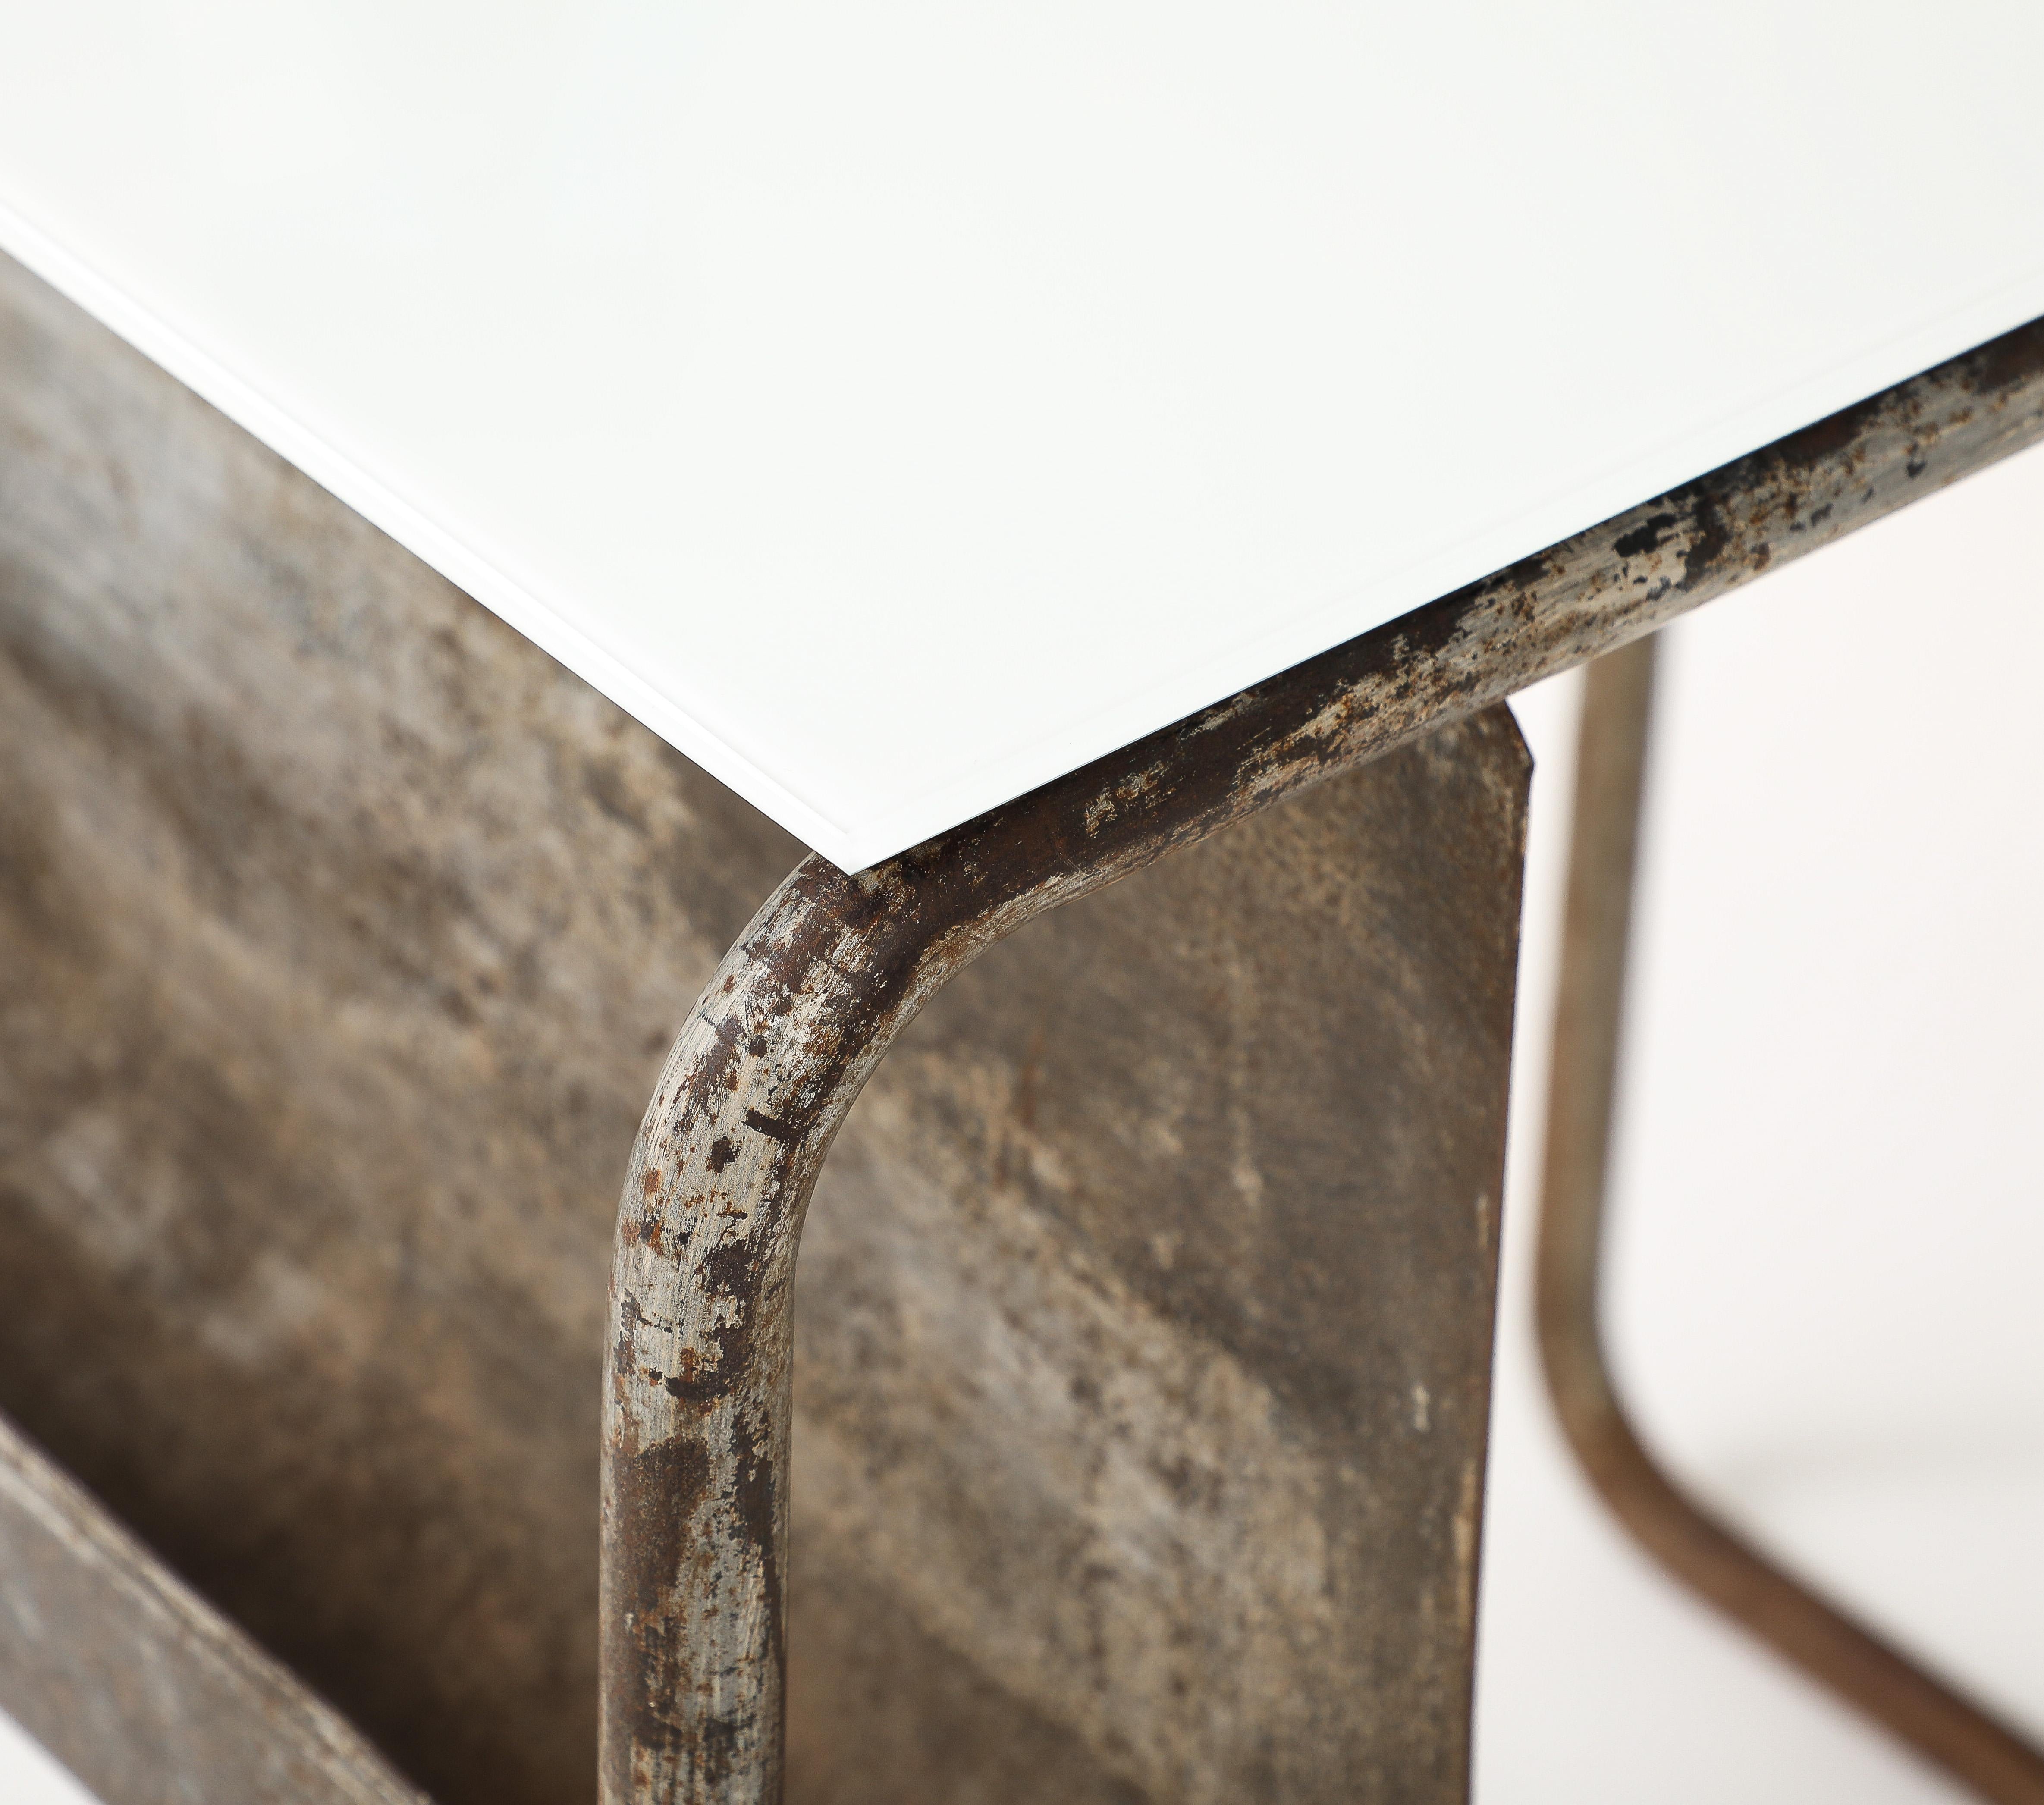 Early Modernist Desk Side Table, Nickel Patina, Opaline Top, France, c. 1920 For Sale 6